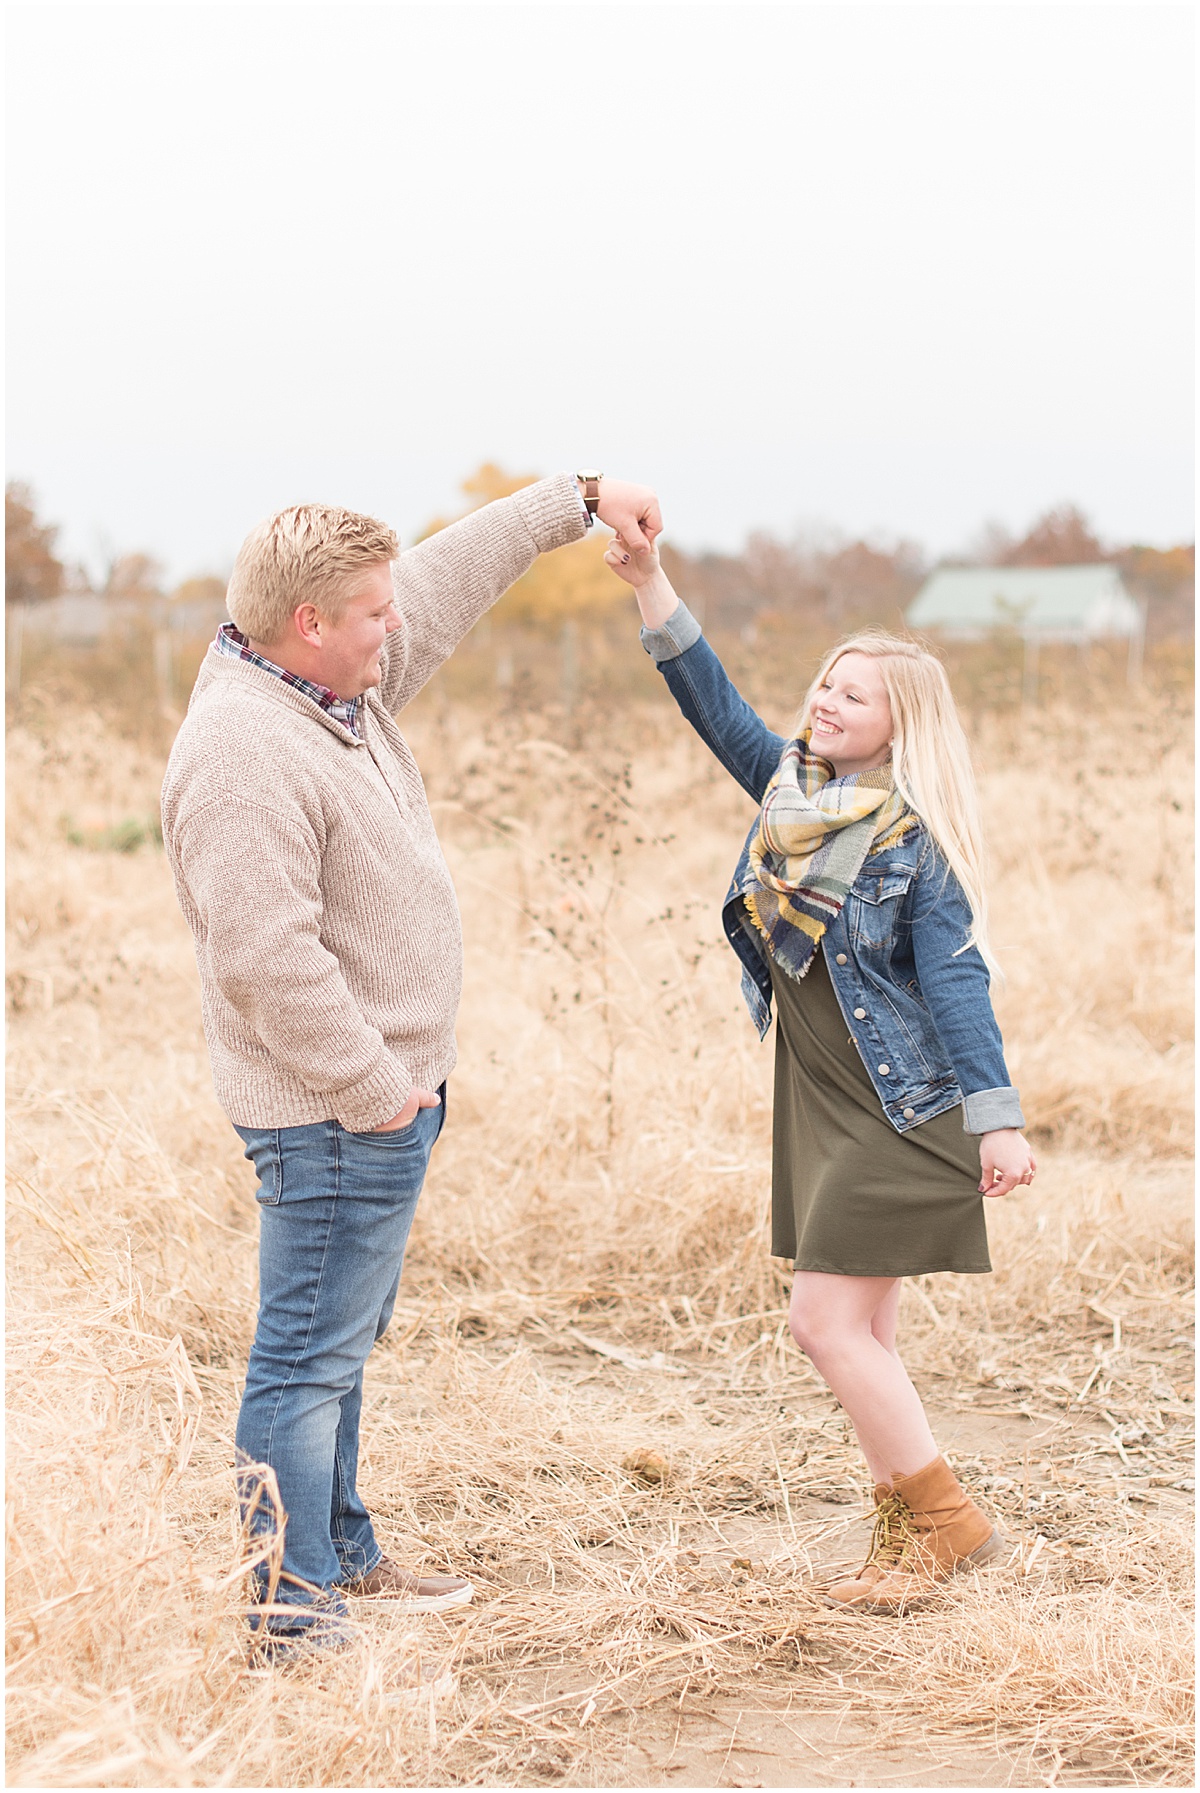 Tyler Van Wanzeele and Baileigh Fleming engagement photos at Wea Creek Orchard in Lafayette Indiana21.jpg